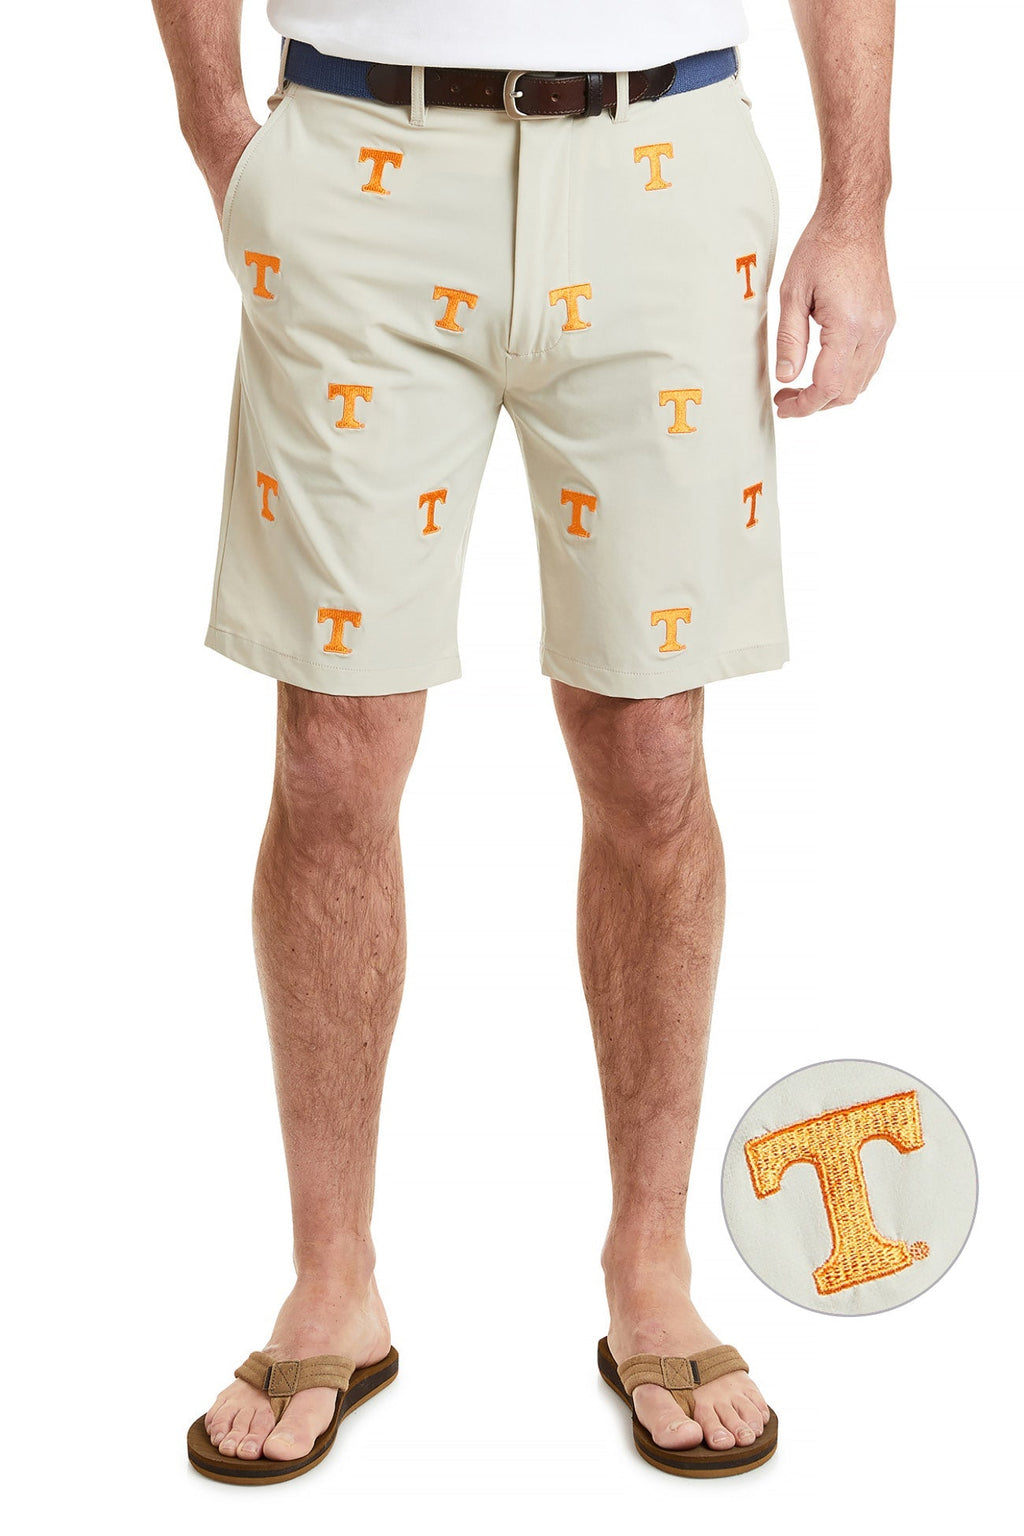 Collegiate ACKformance Short Khaki with Tennessee MENS EMBROIDERED SHORTS Castaway Nantucket Island